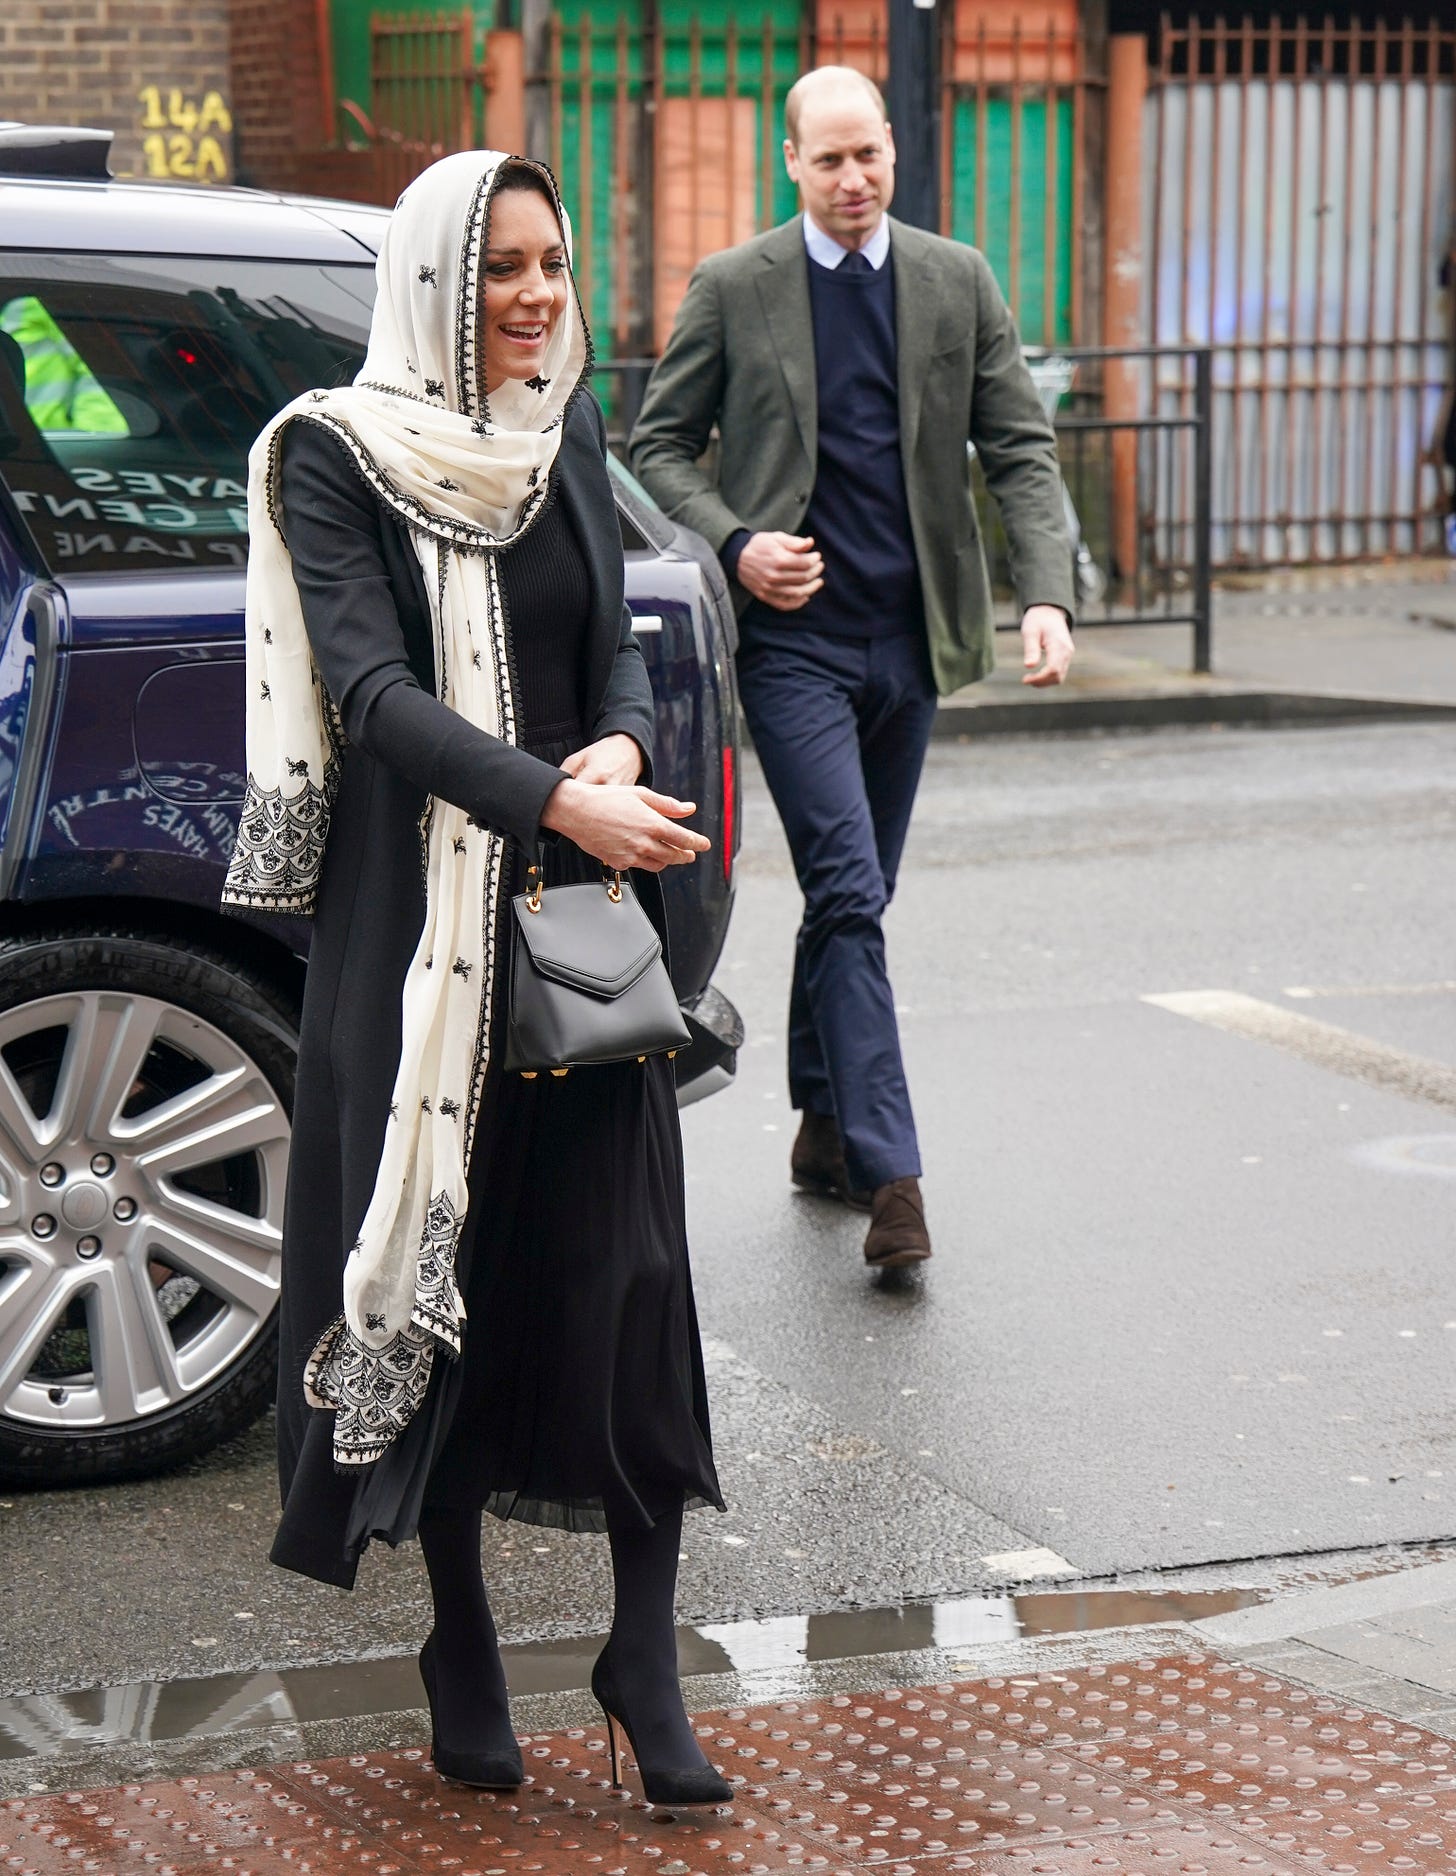 Princess of Wales wearing a headscarf with Prince William in the background